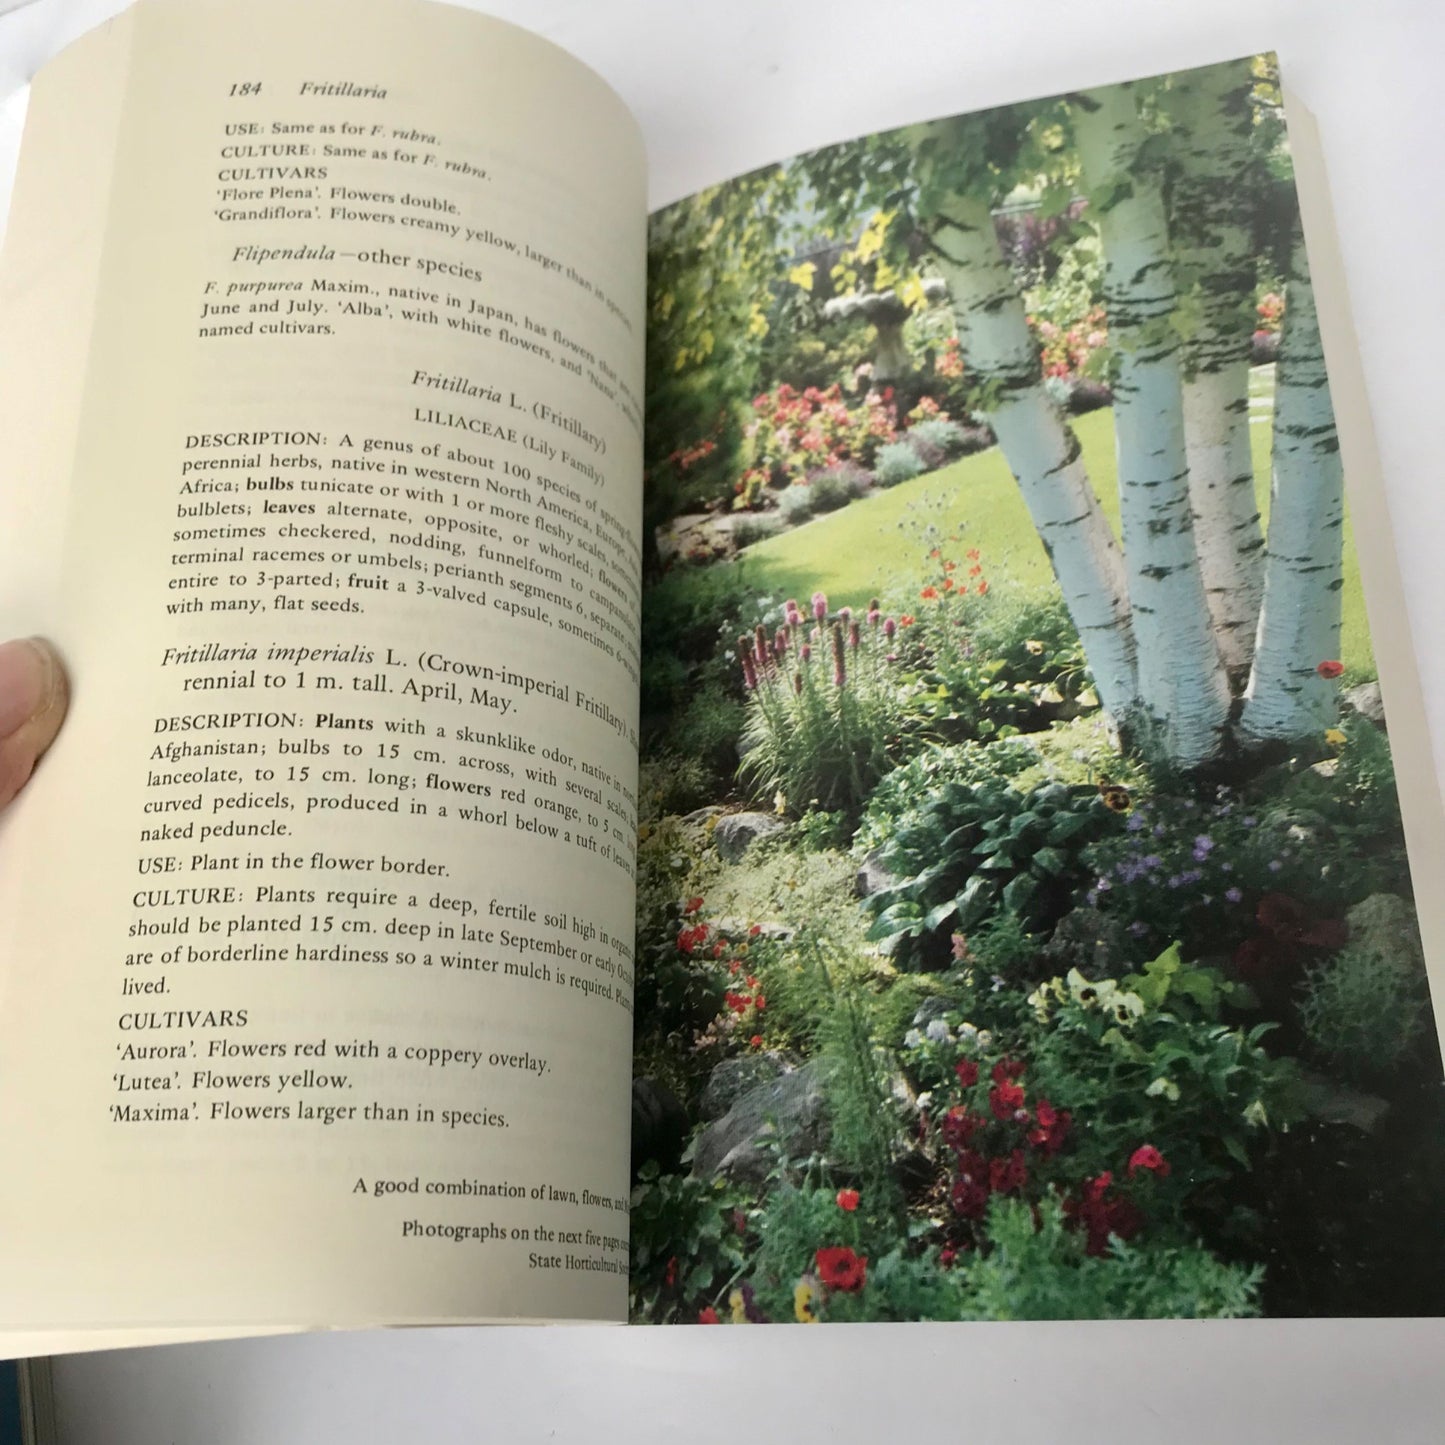 Flowers for Northern Gardens Book by Leon Snyder NICE! Gardening